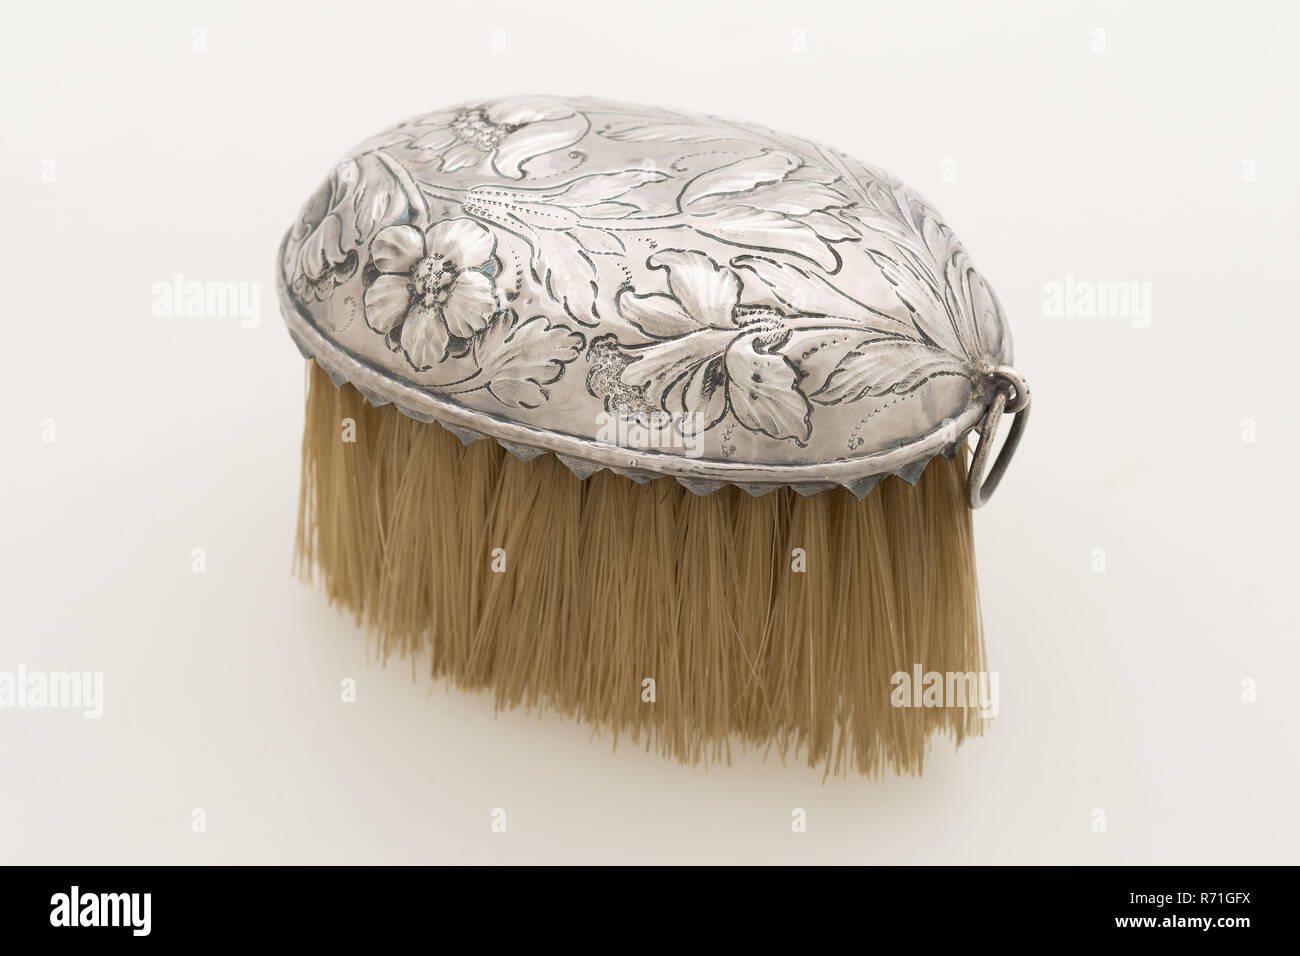 Silversmith: Johannes Pot, Brush back, coat brush brush silver wood hair, driven sawn, driven oval silver flower ornament detail: trumpet narcis tulip poppy sawn zigzag edge along the outer edge with hanging ring underlay (debossed) clean clothes care Stock Photo